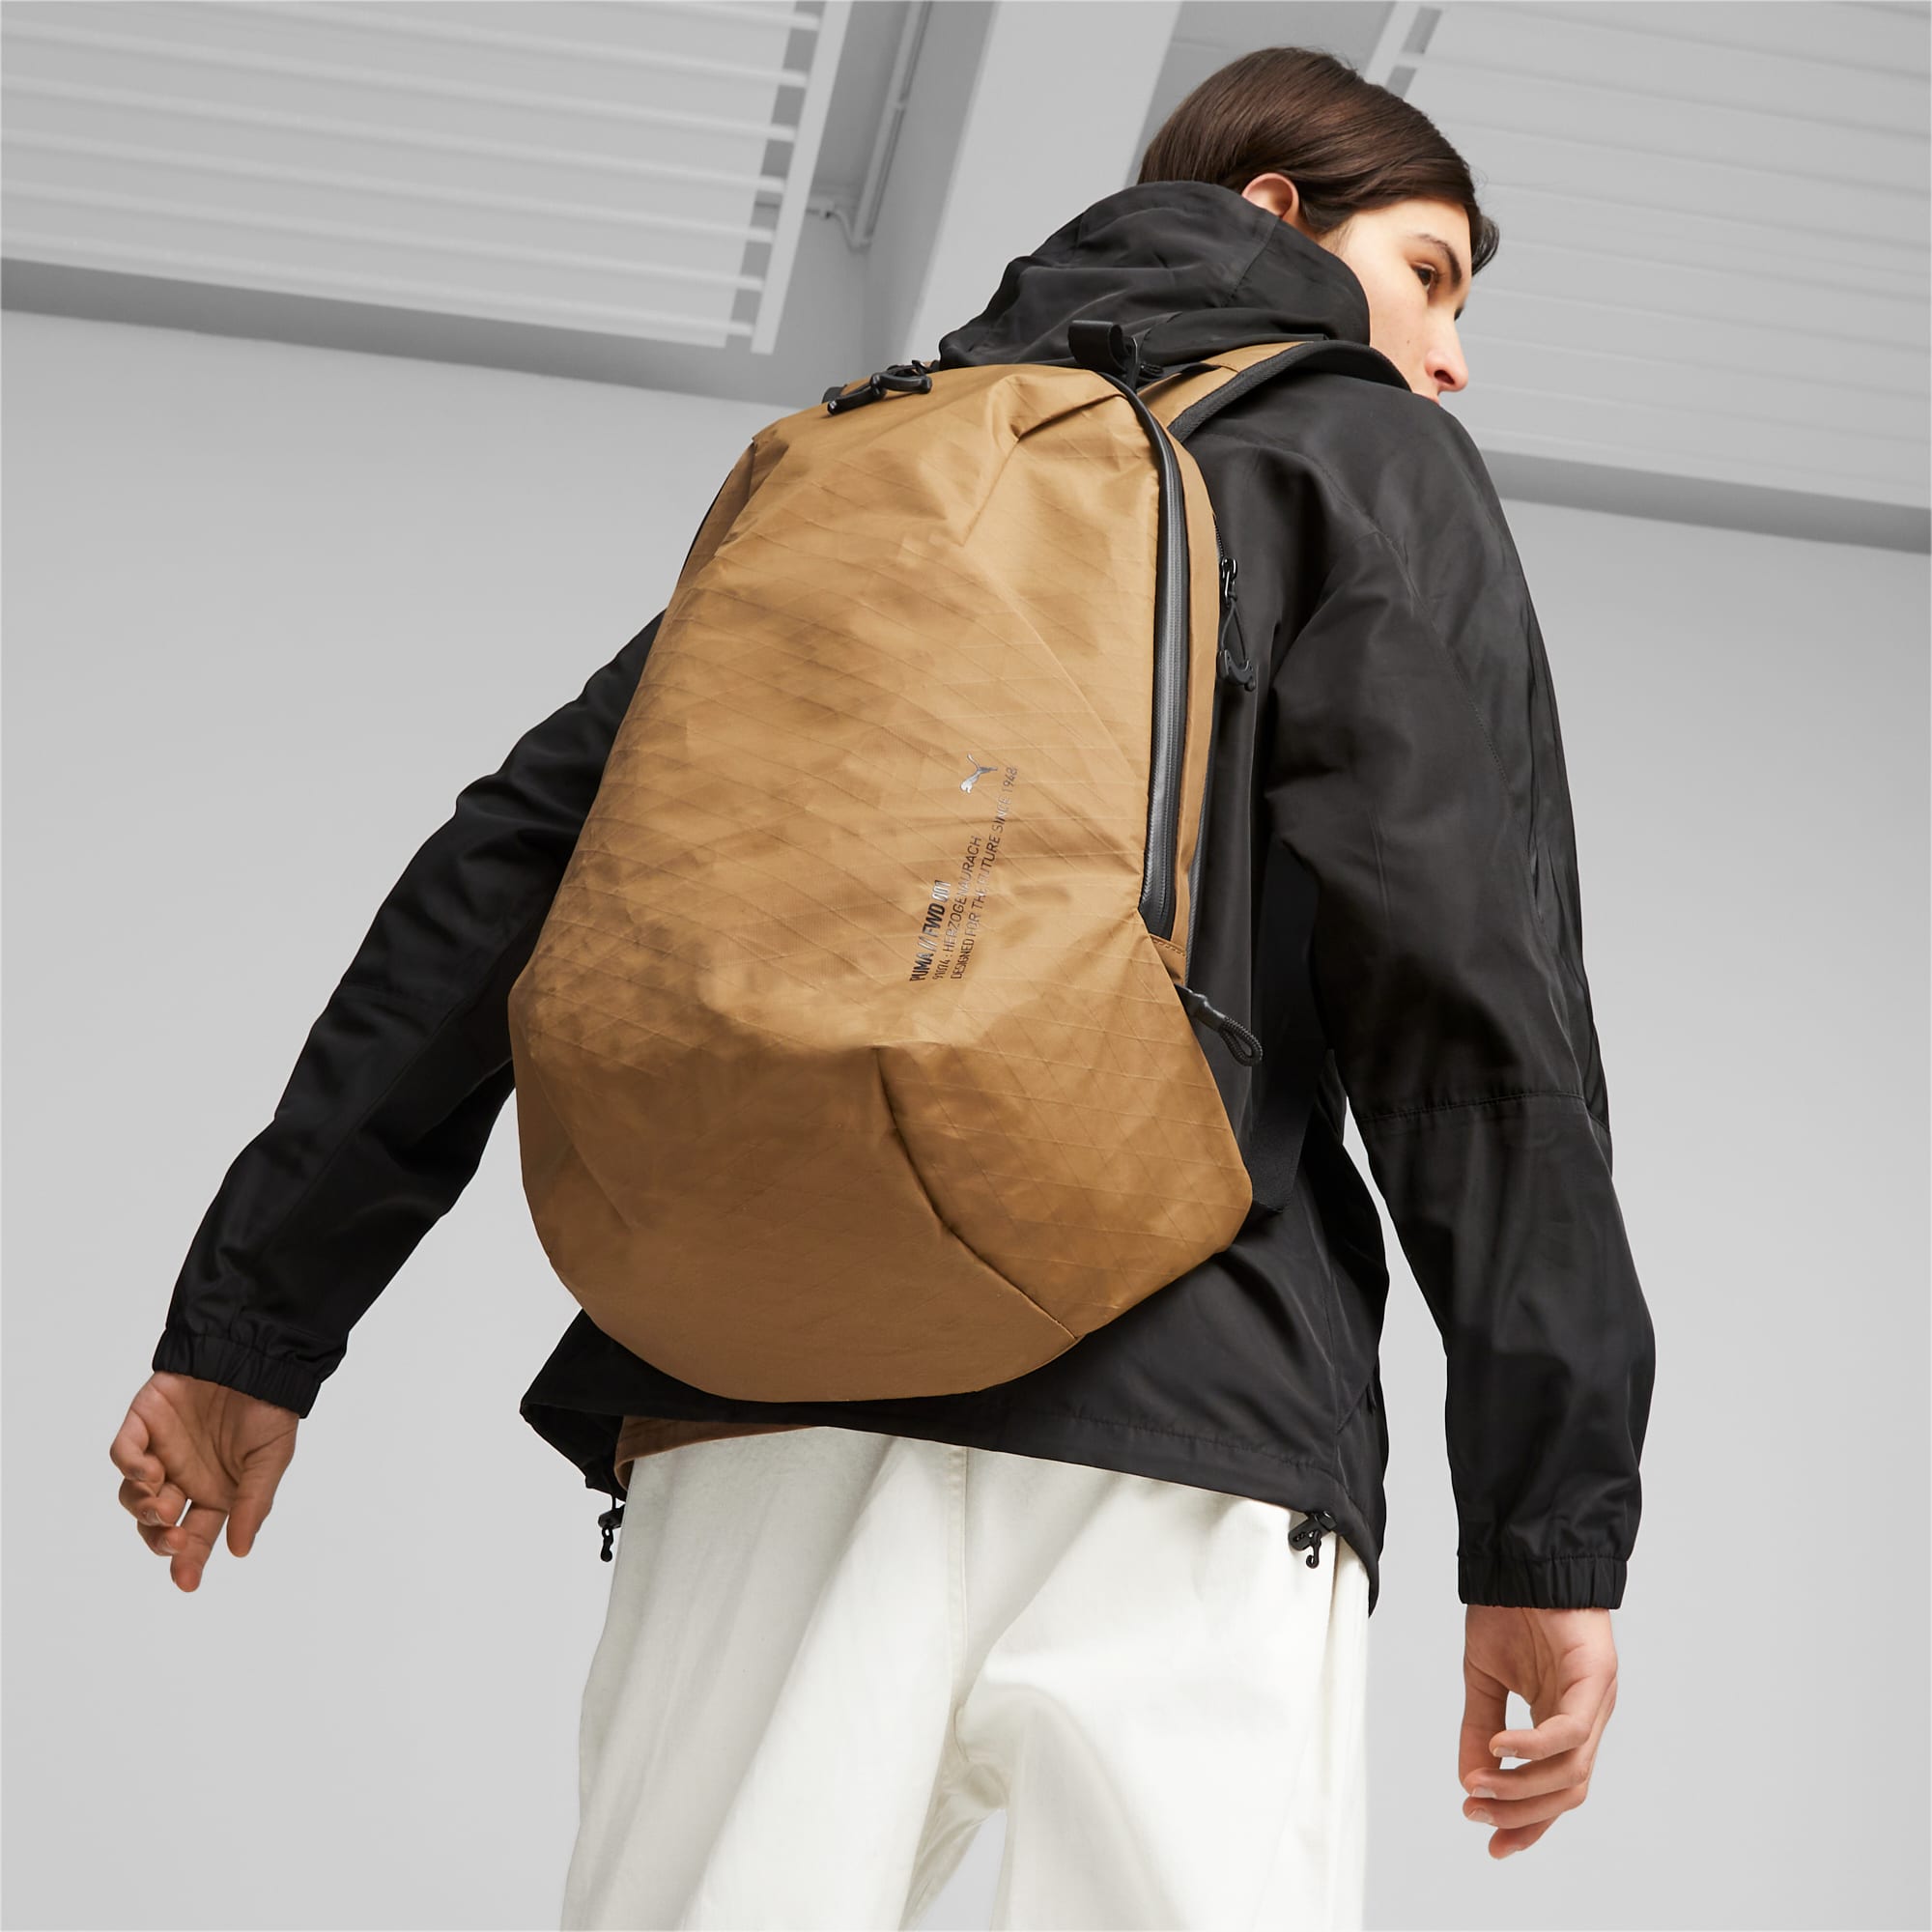 Men's PUMA Fwd Backpack, Chocolate Chip